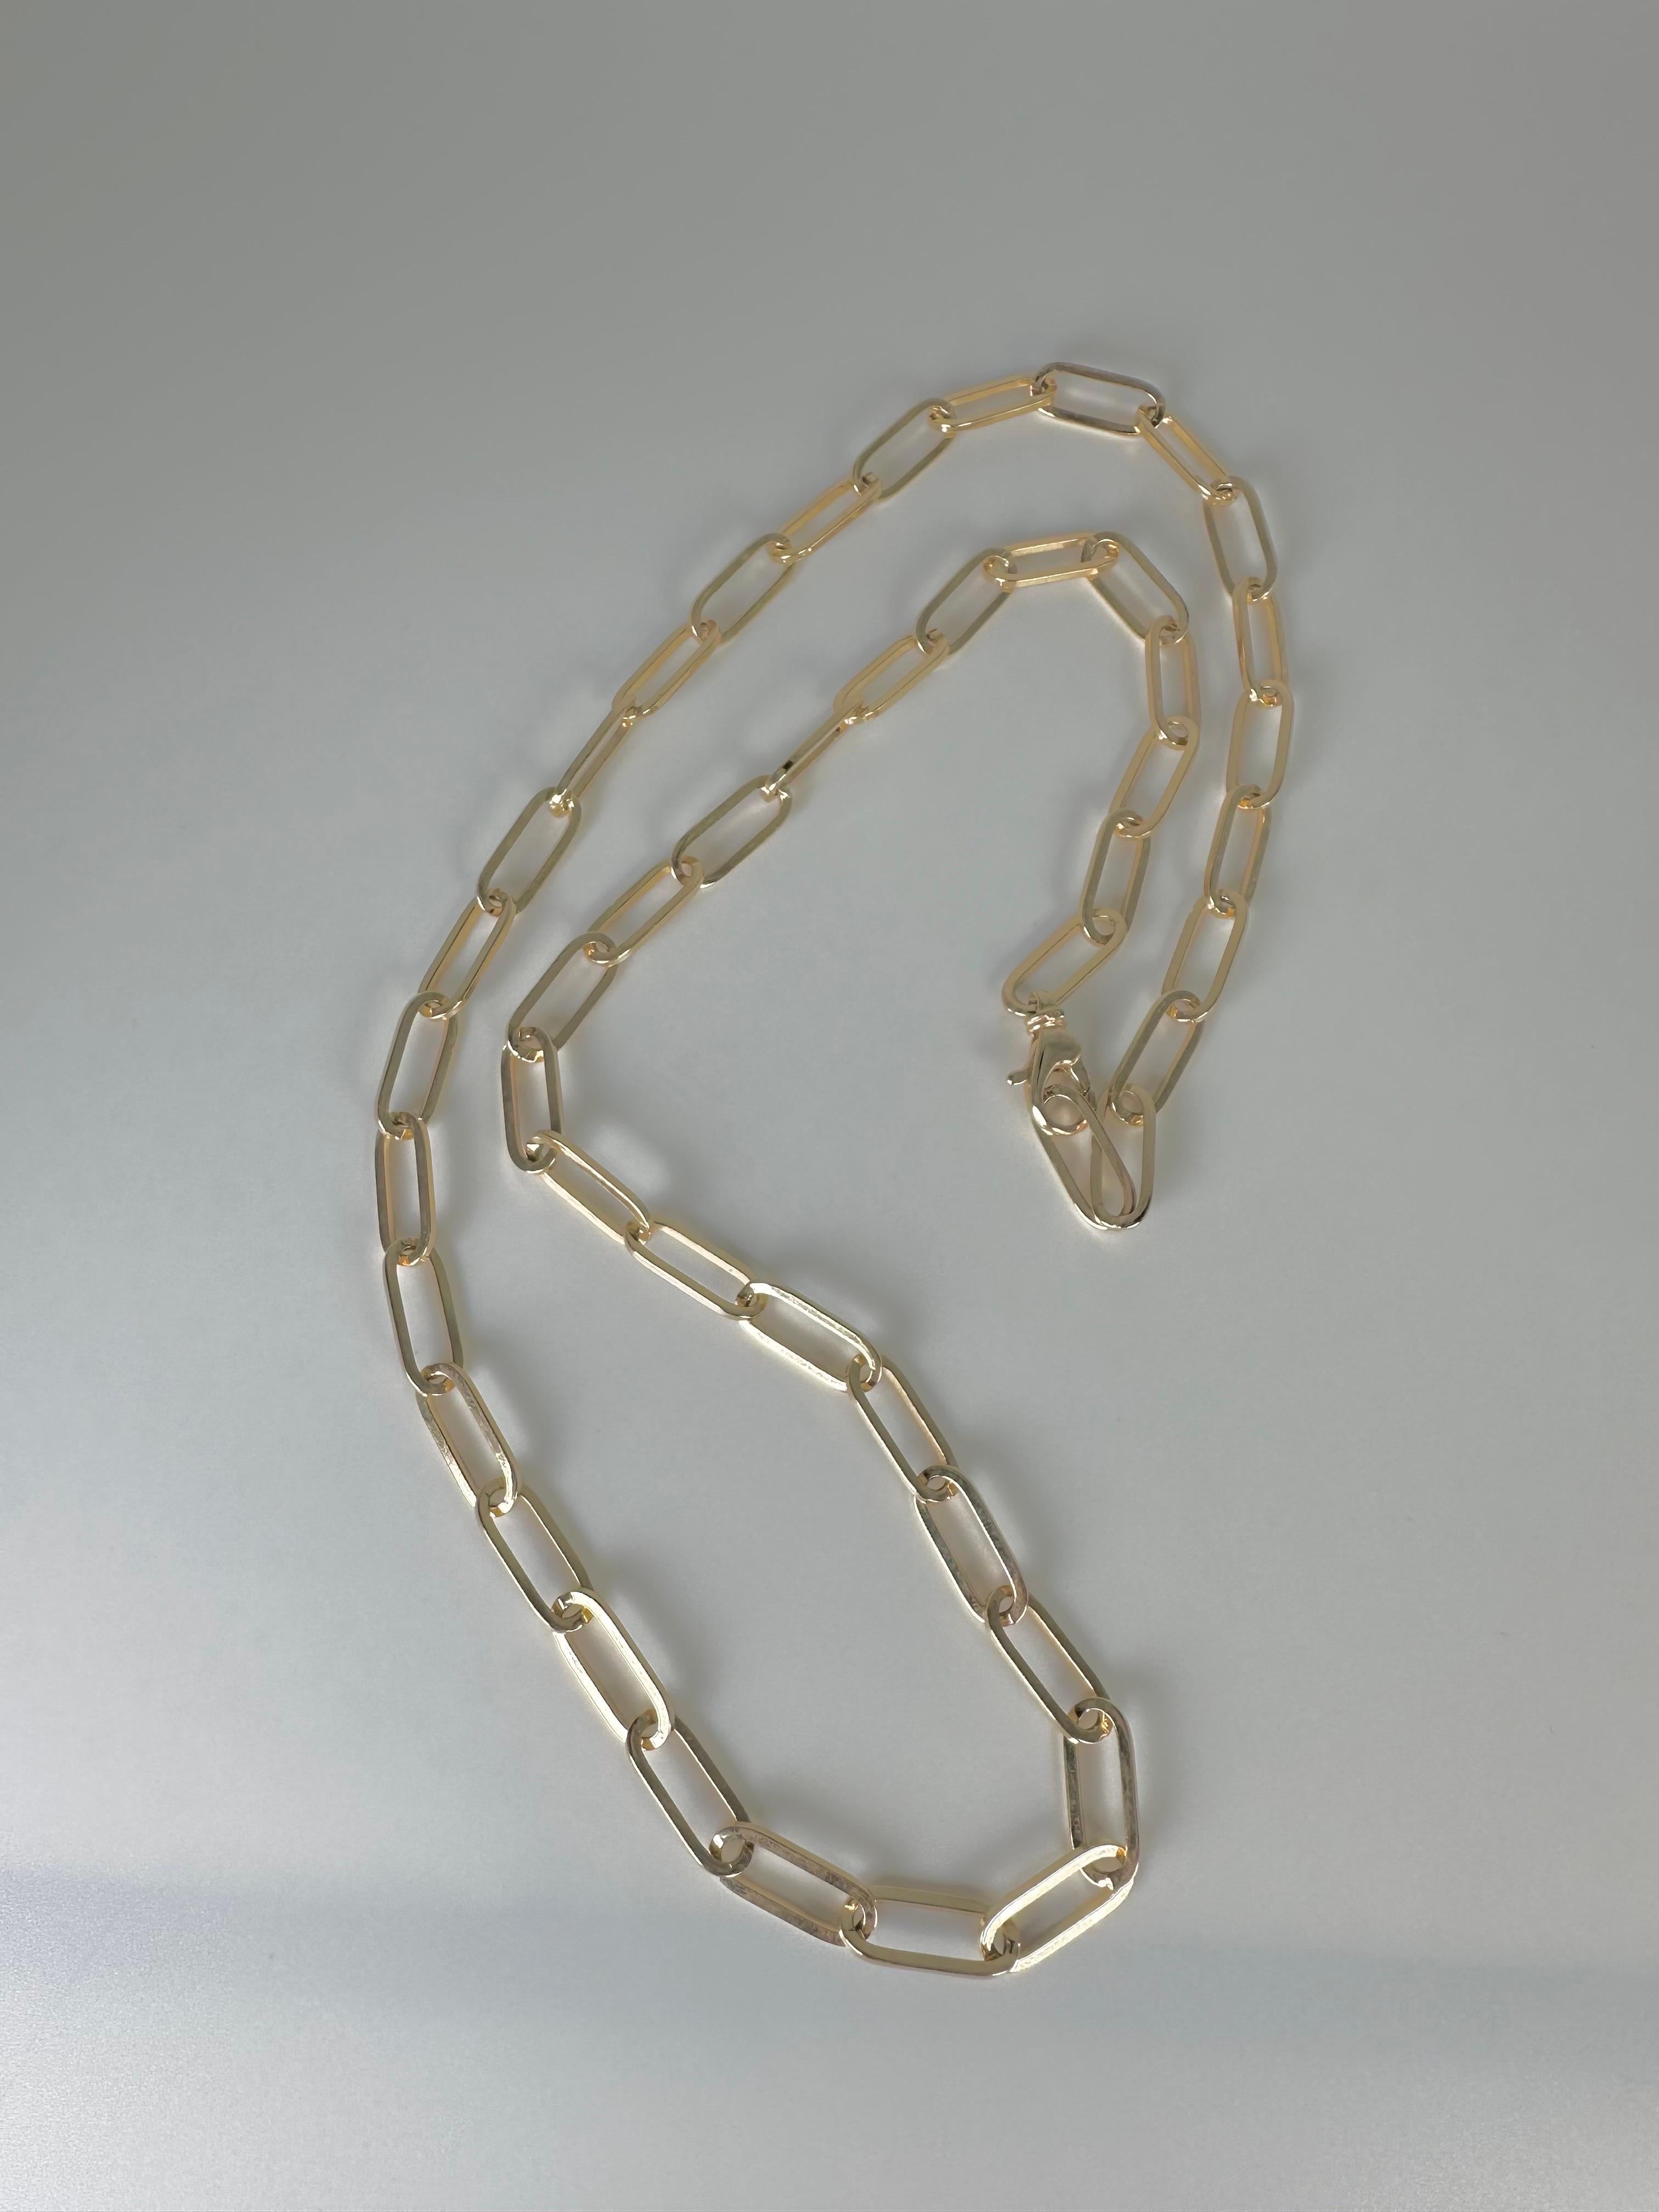 Inredible paperclip necklace made with solid gold, every clip is polished to perfection and then assembled. This necklace will look incredible on its own or with any pendant. At the length of 26 inches you can use the chain as double or single and